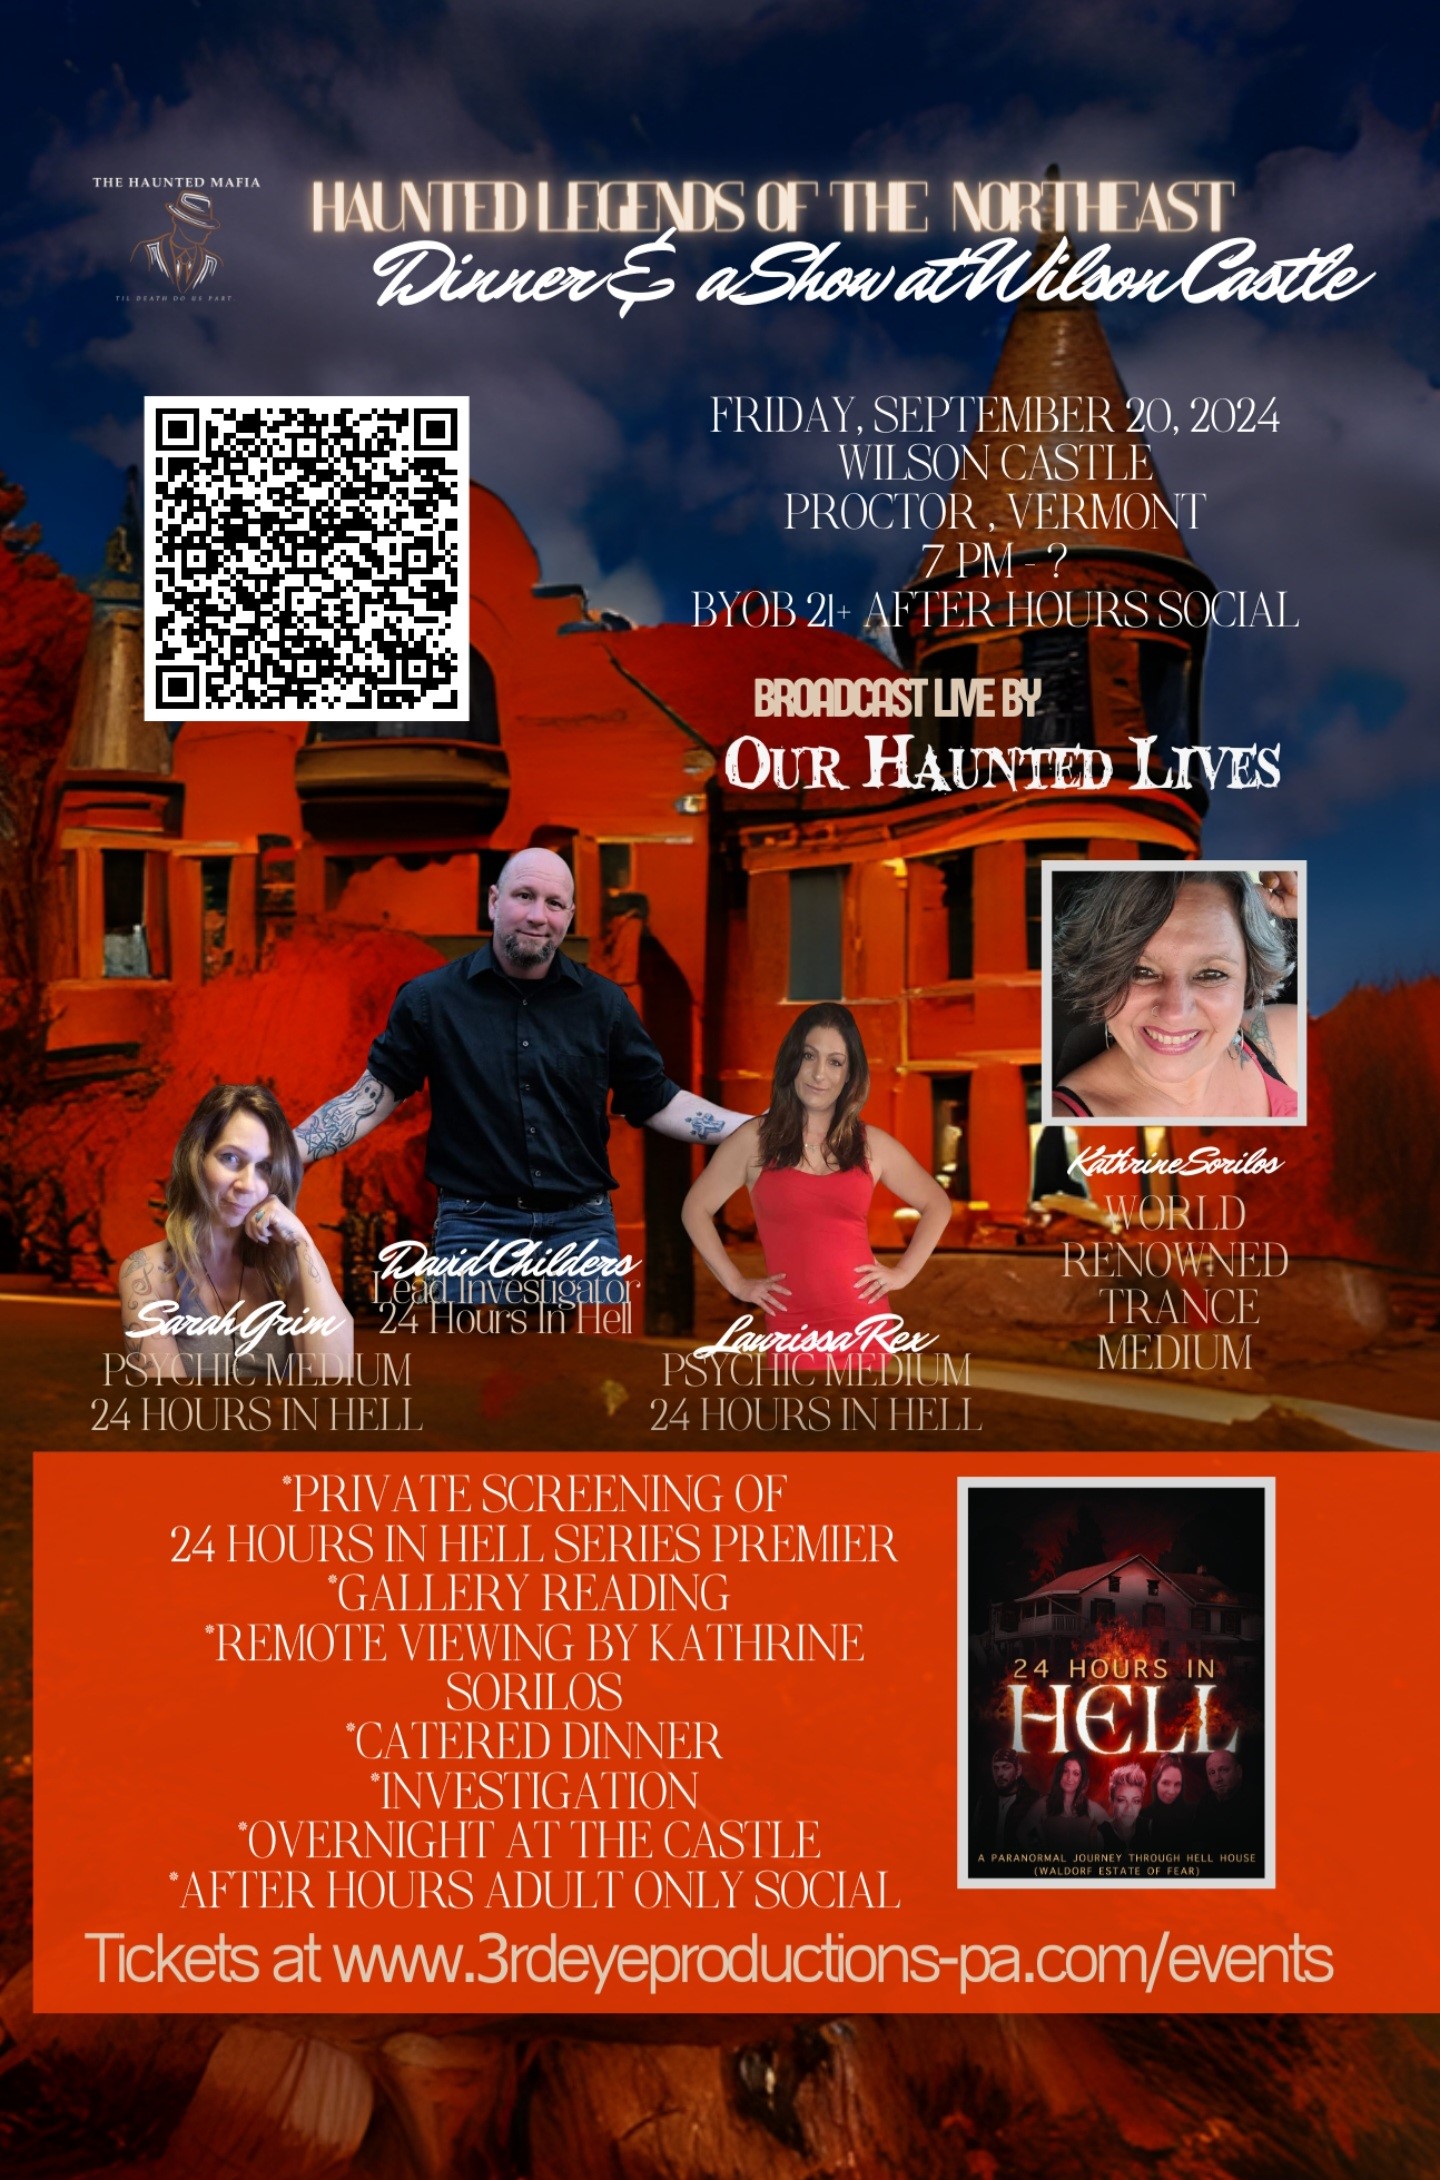 24 Hours in Hell Guided Investigation: Haunted Legends of New England: Dinner & a Show at Wilson Castle  on Sep 20, 19:00@Wilson Castle - Buy tickets and Get information on Third Eye Event Productions, L 